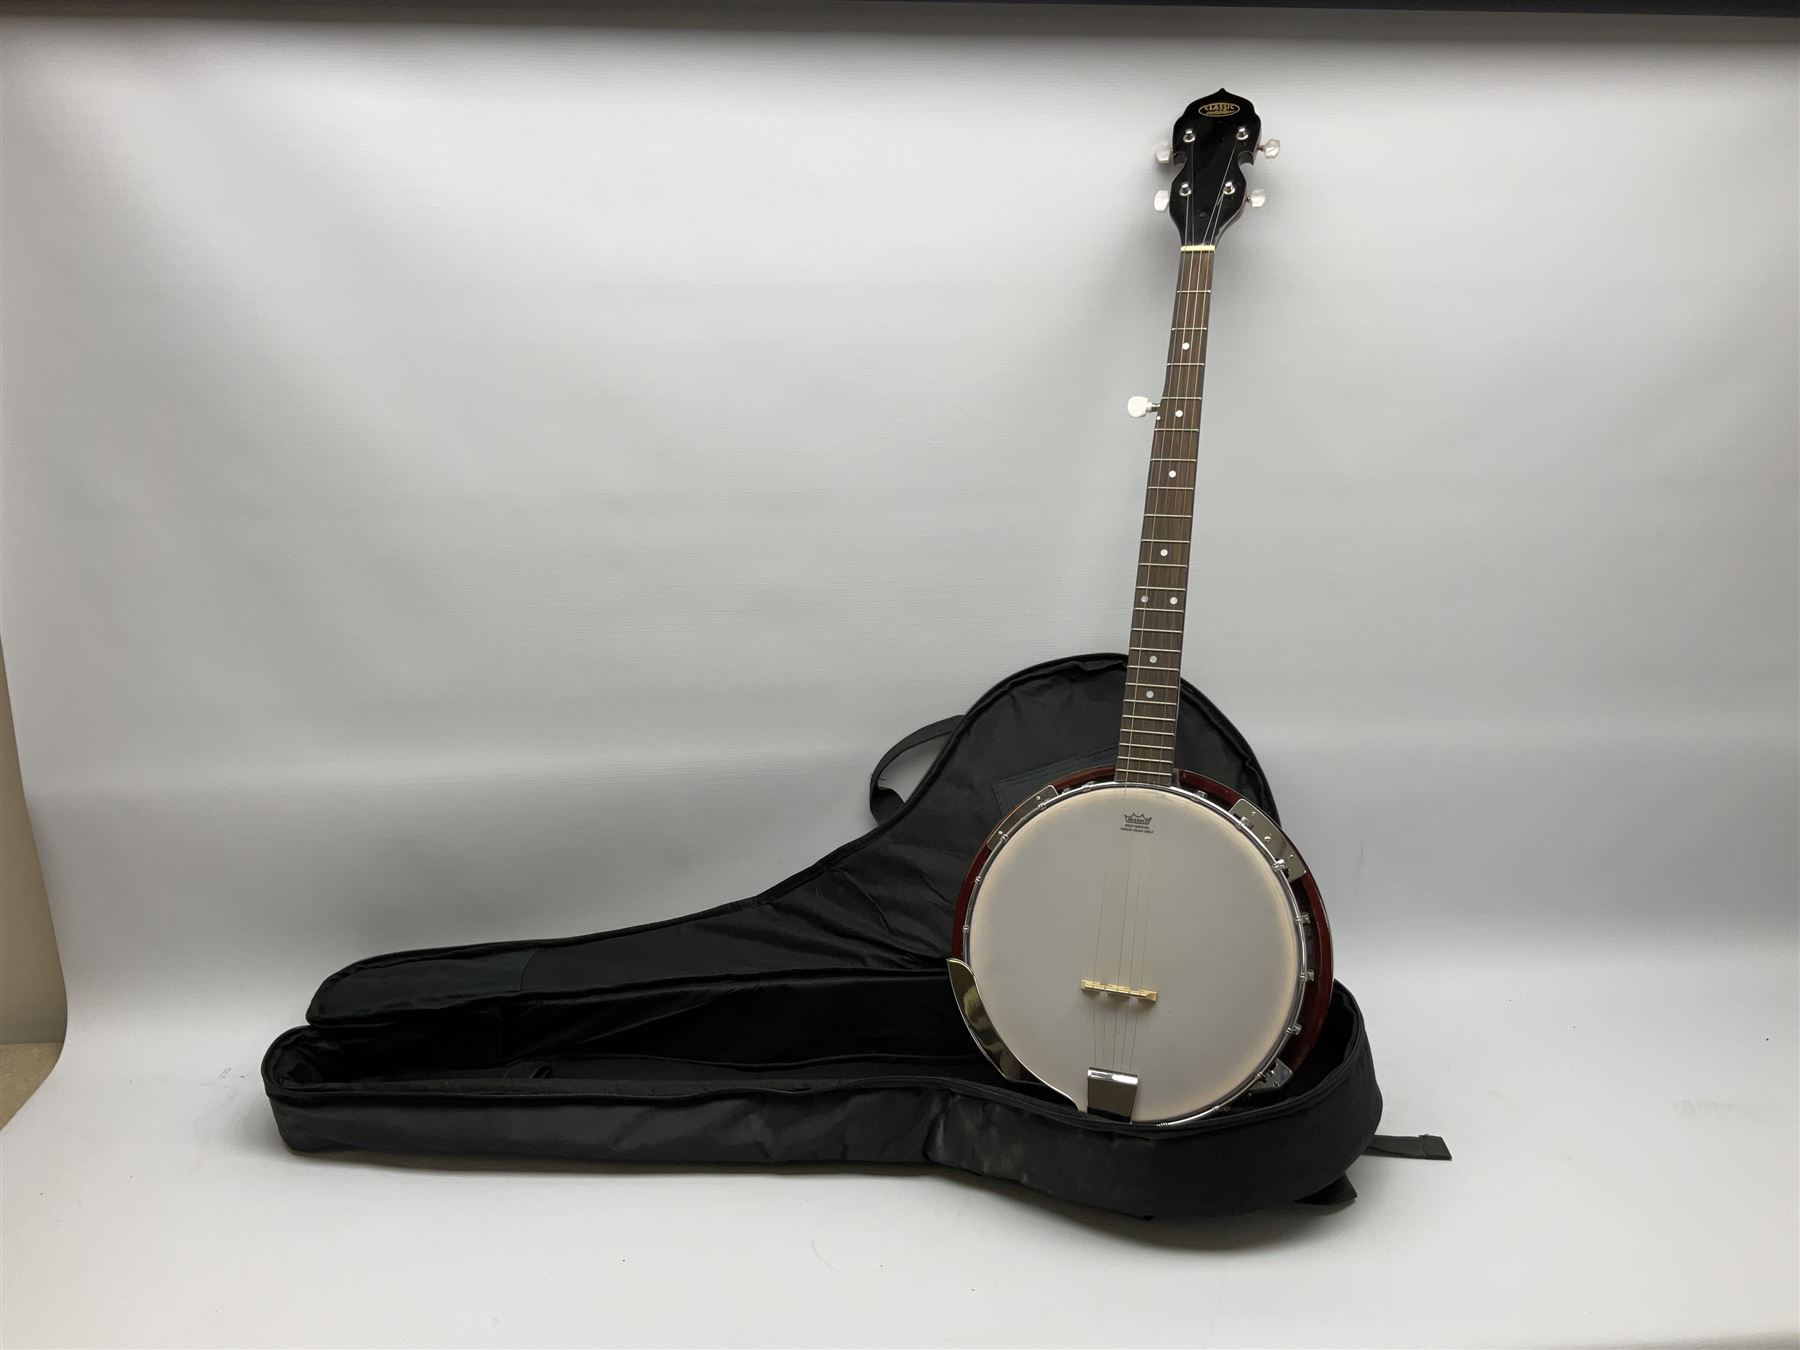 Classic Cantabile five-string banjo with sapele mahogany back L97.5cm; in soft carrying case - Image 12 of 12